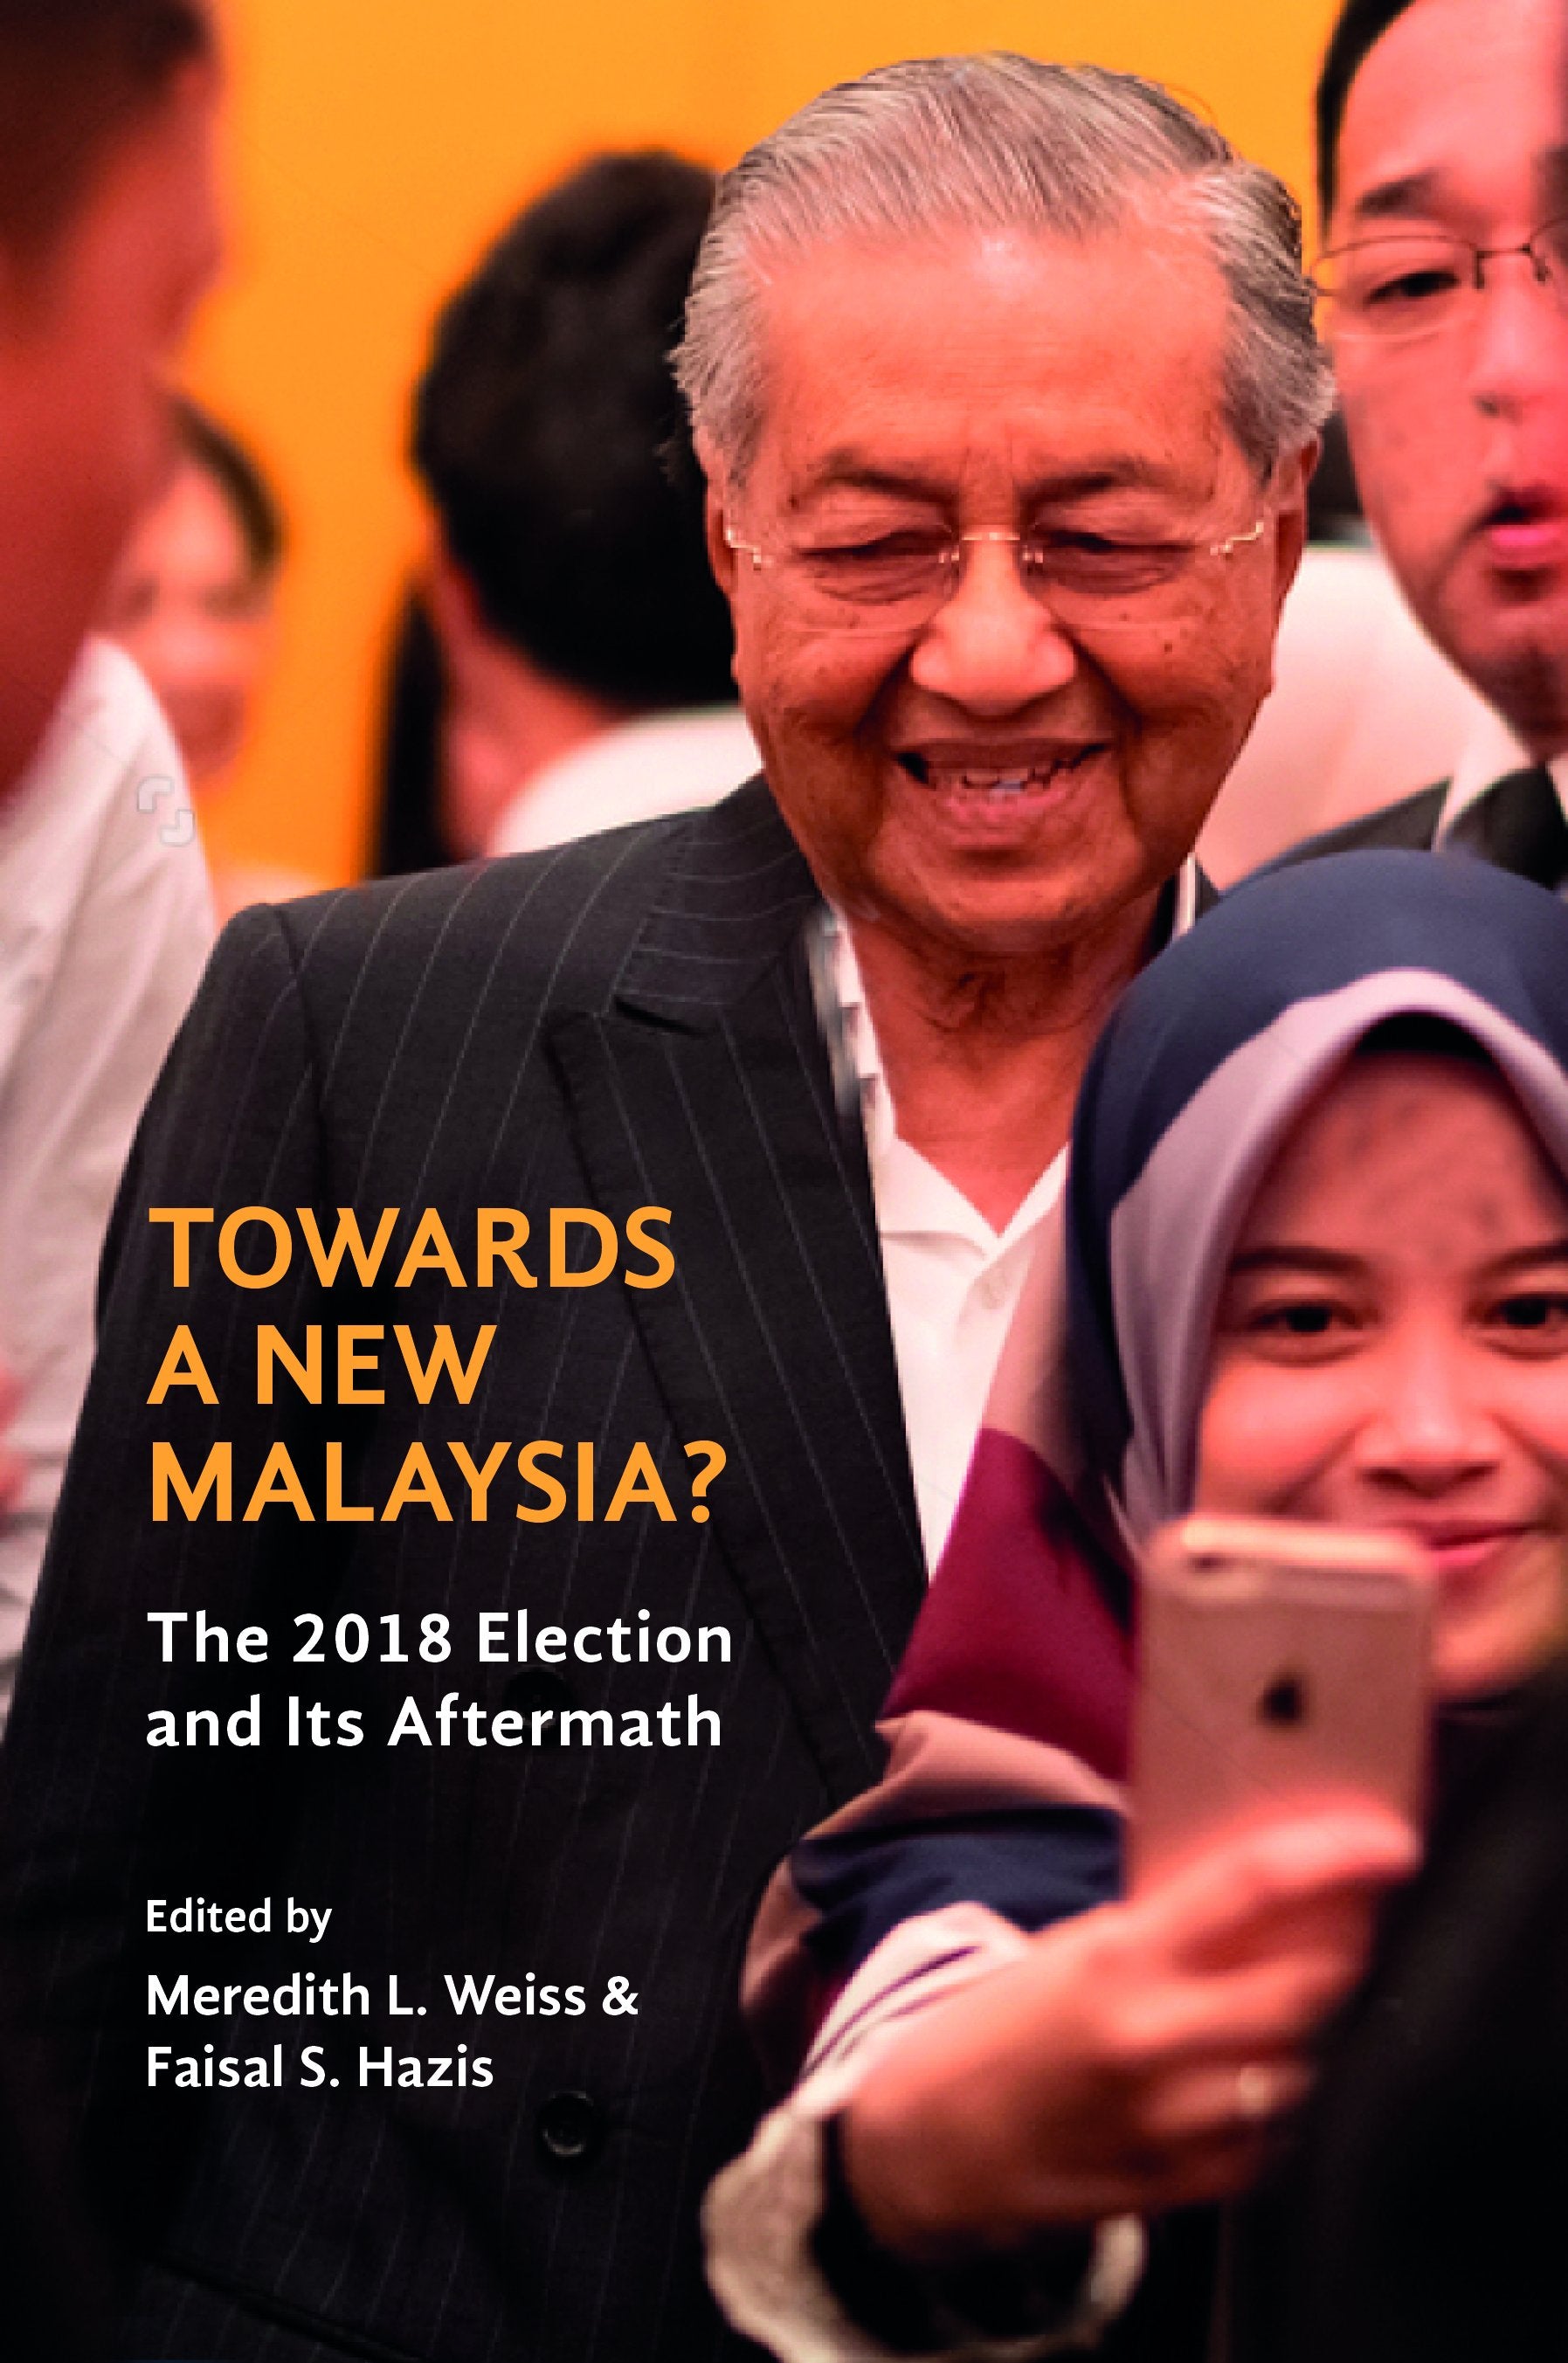 Towards A New Malaysia: the 2018 Election and its Aftermath